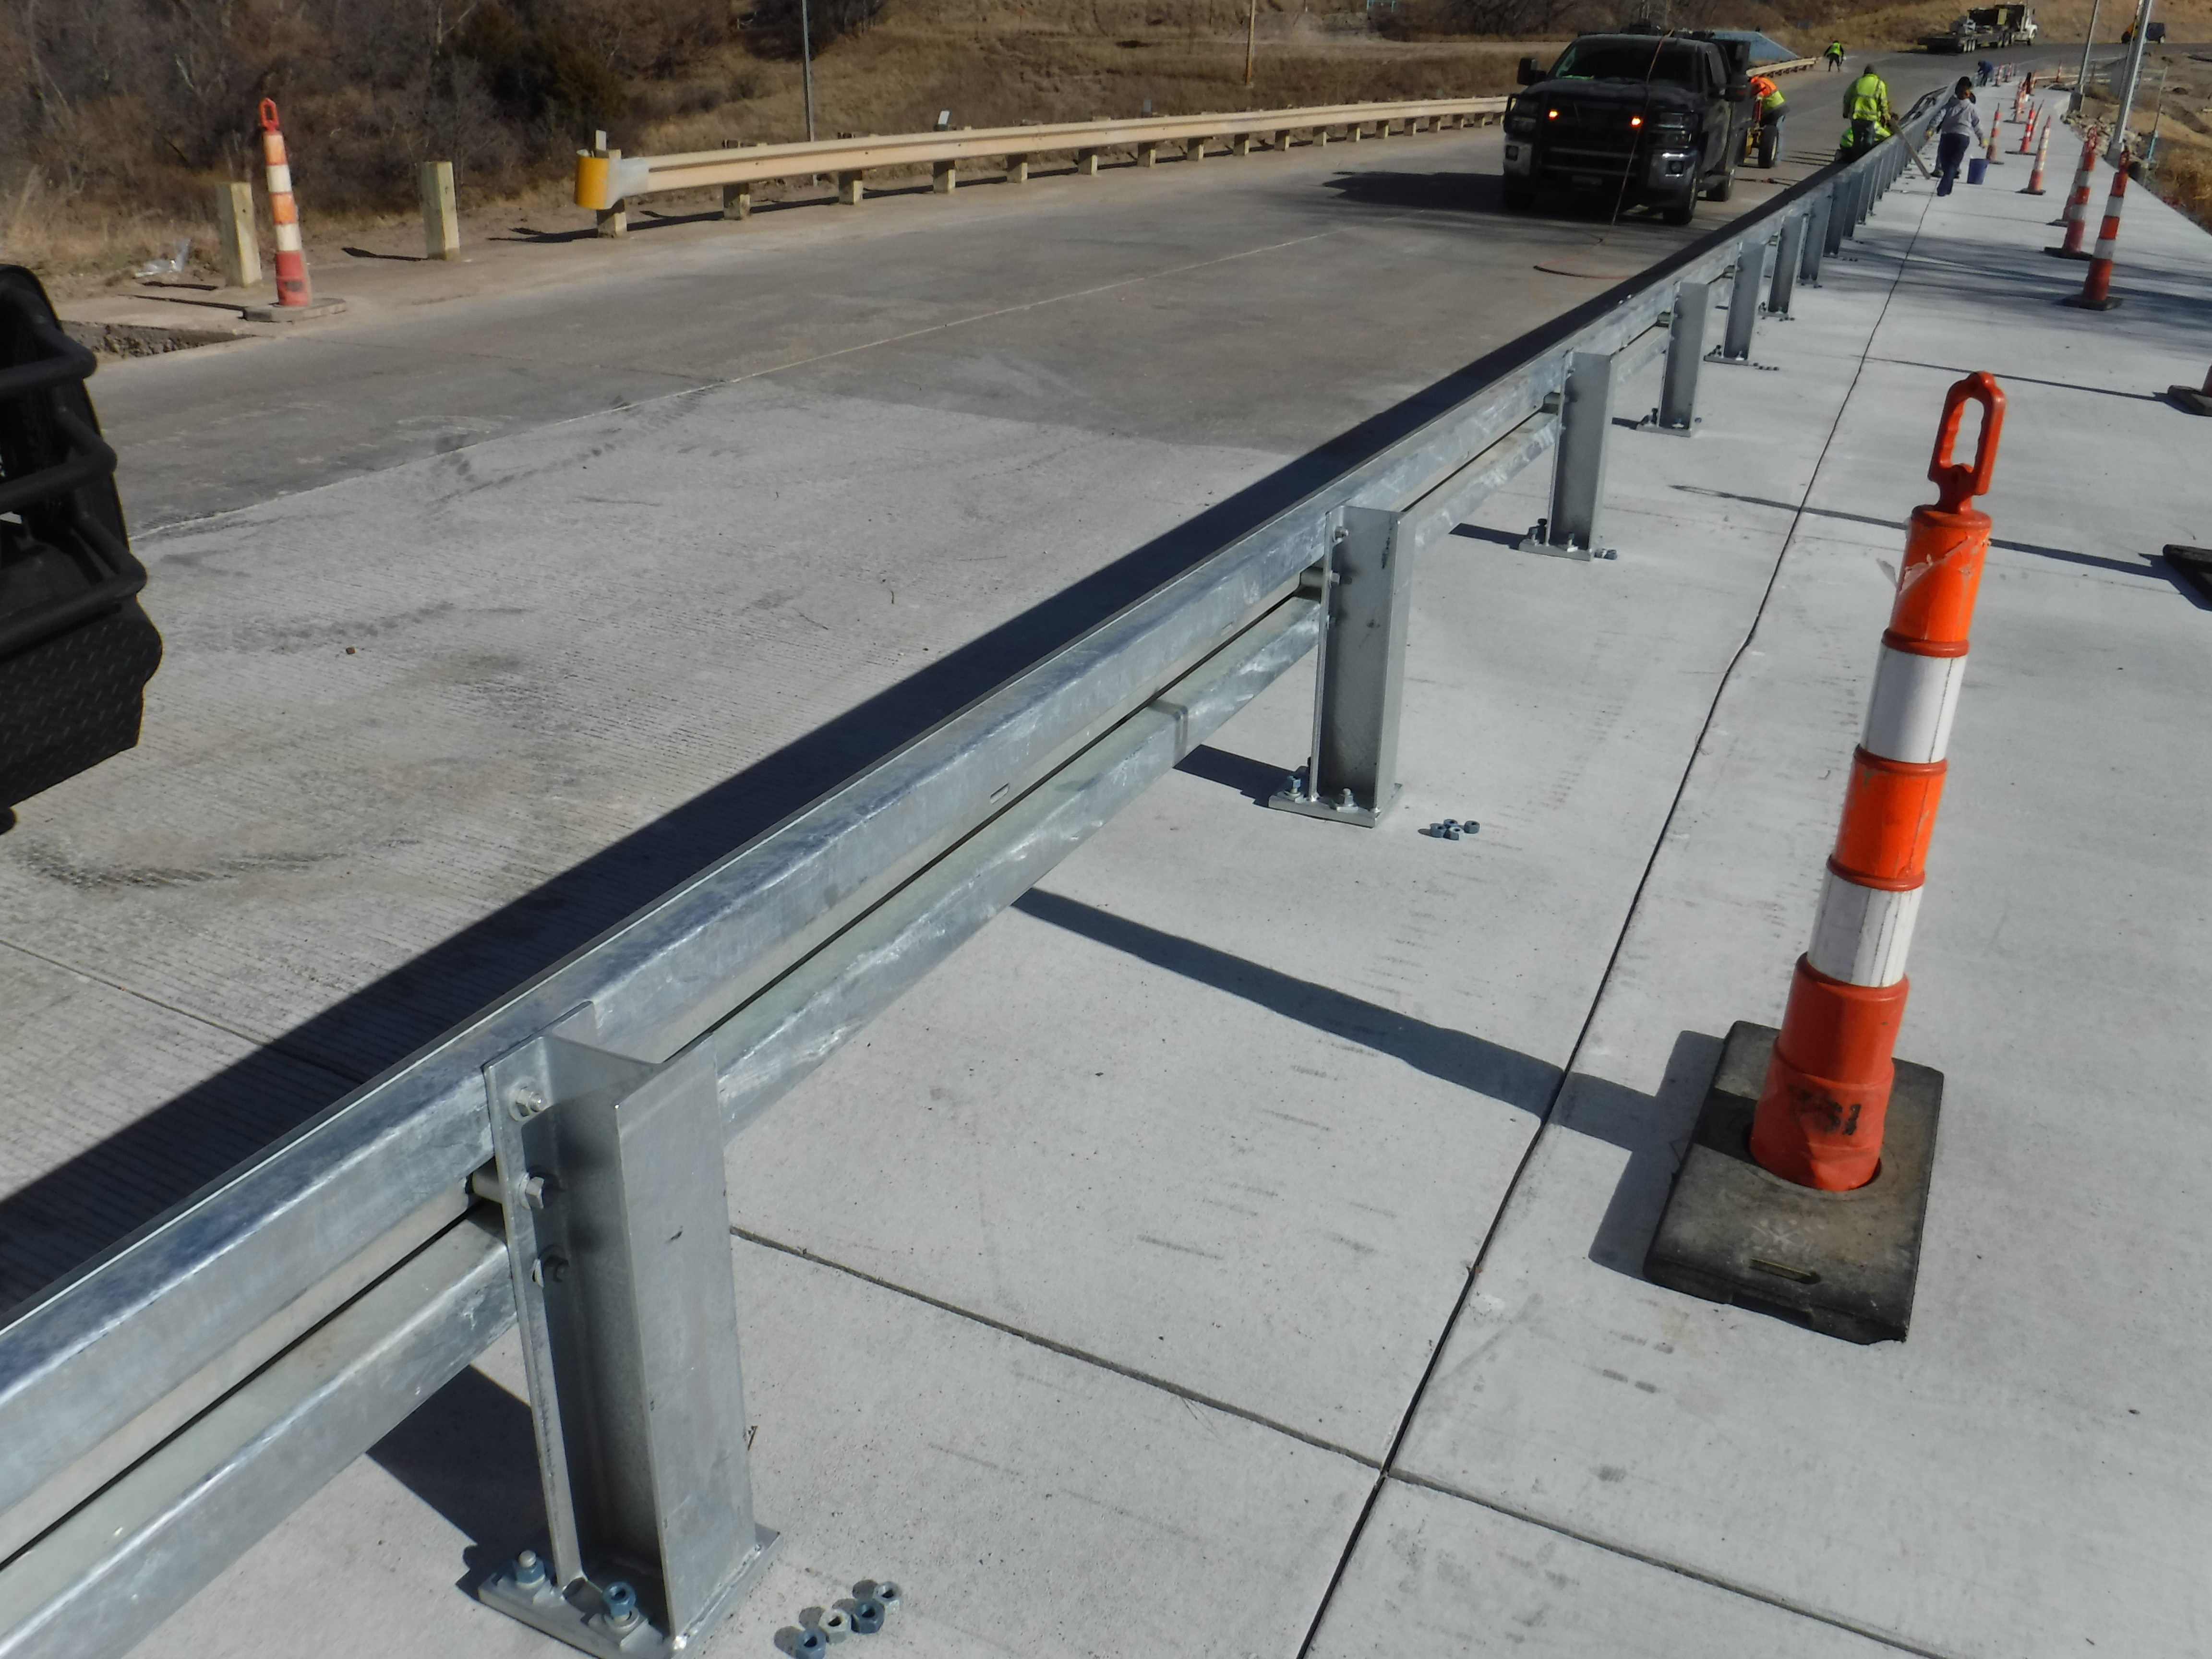 KLJ worked with Loiseau Construction, Inc. to find an alternative engineering design for the retaining wall, concrete pavement, and guardrail installation.